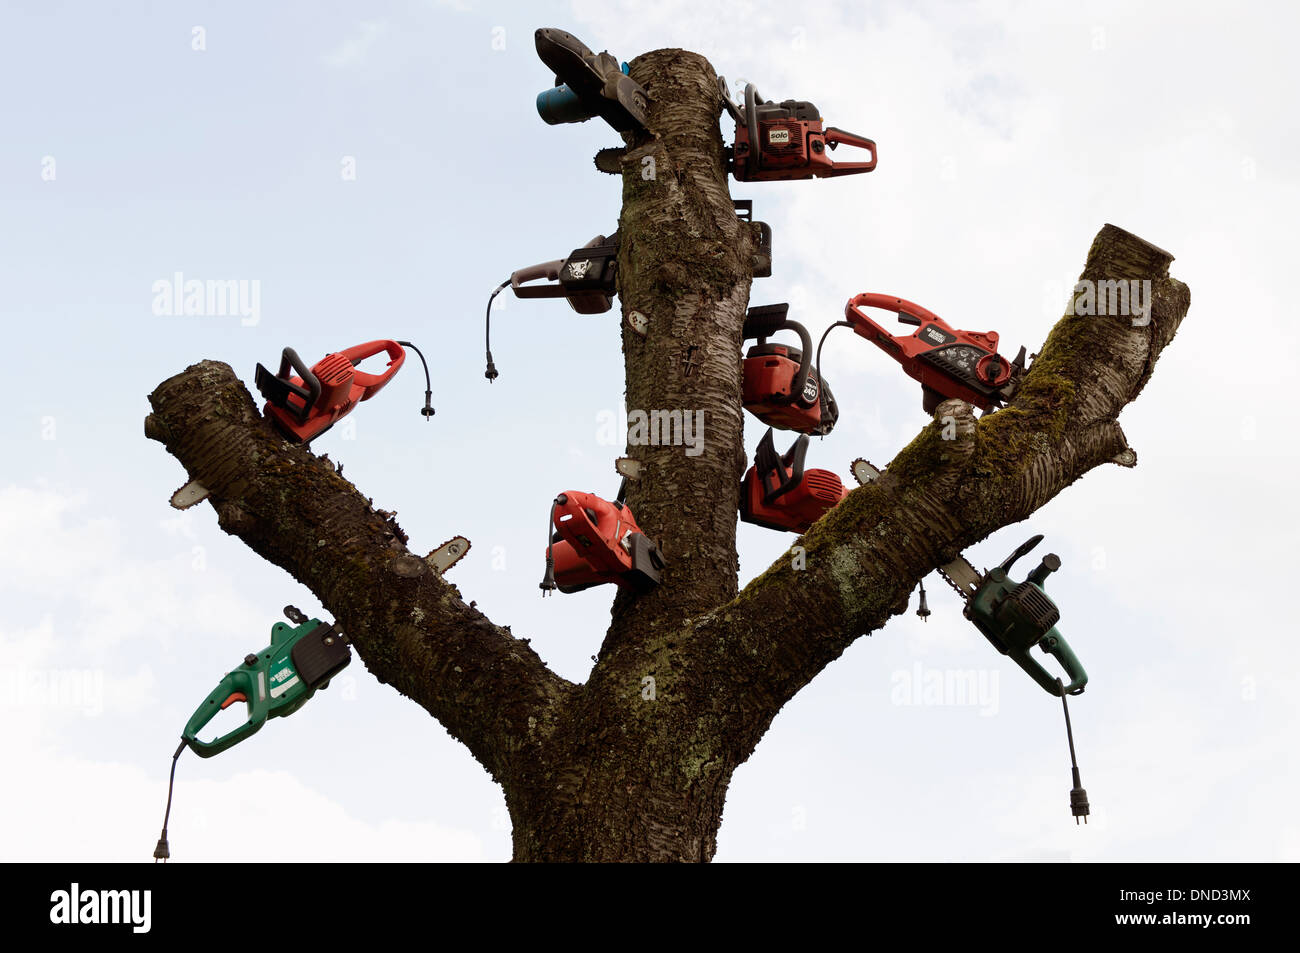 Disused electric chainsaws displayed in a tree Stock Photo